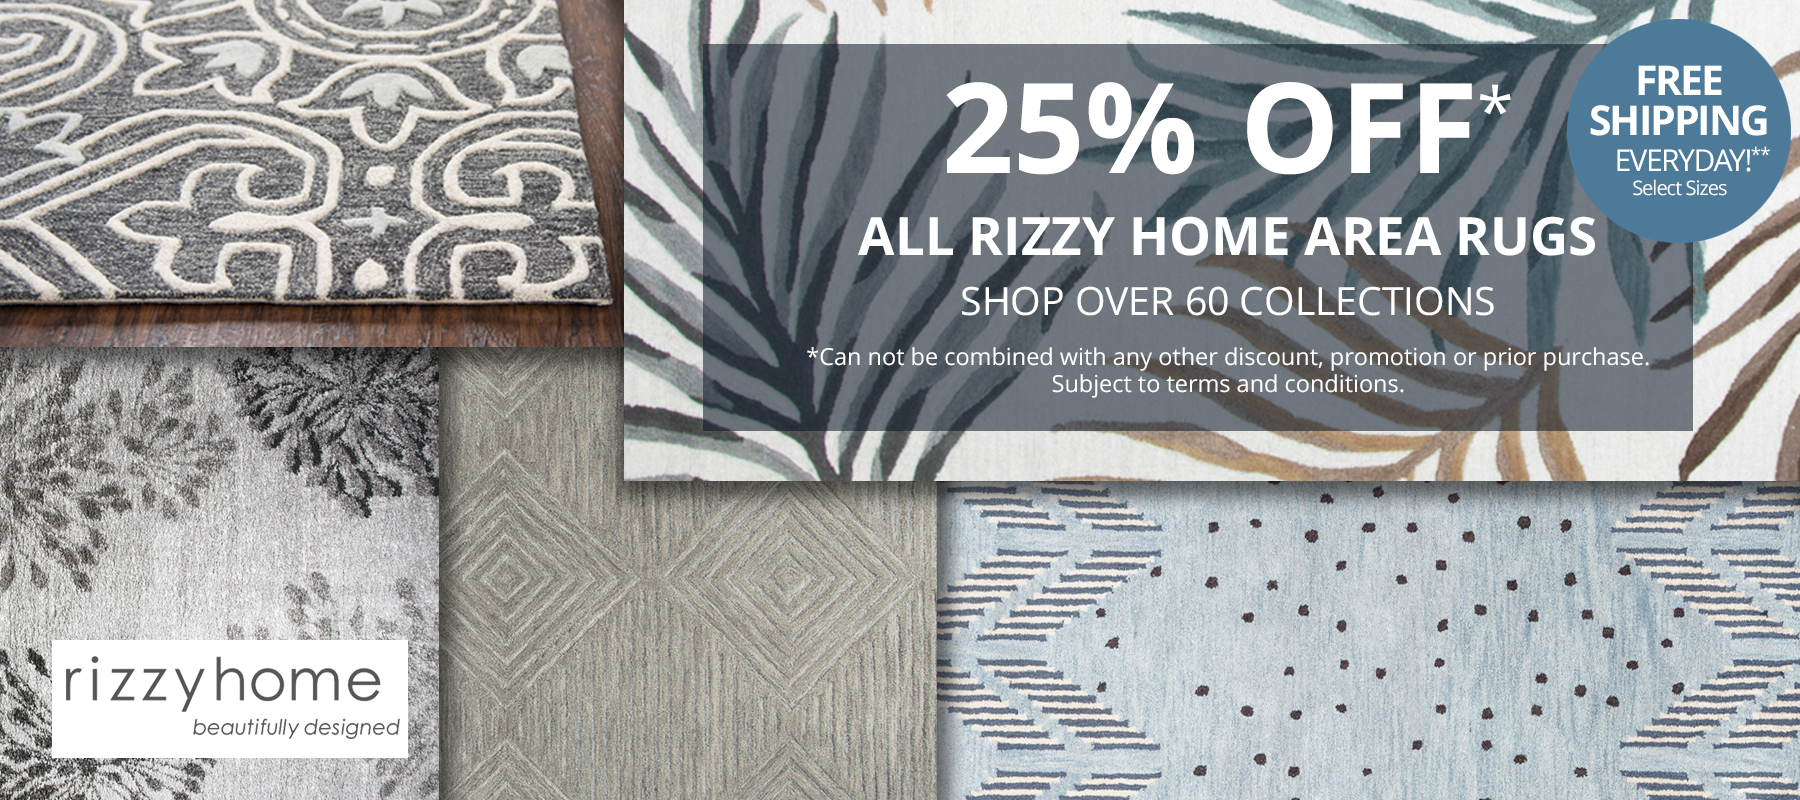 25% Off* All Rizzy Home Area Rugs. Shop Over 60 Collections. Free Shipping Everyday!** Select Sizes. *Can not be combined with any other discount, promotion or prior purchase. Subject to terms and conditions. Shop Now.